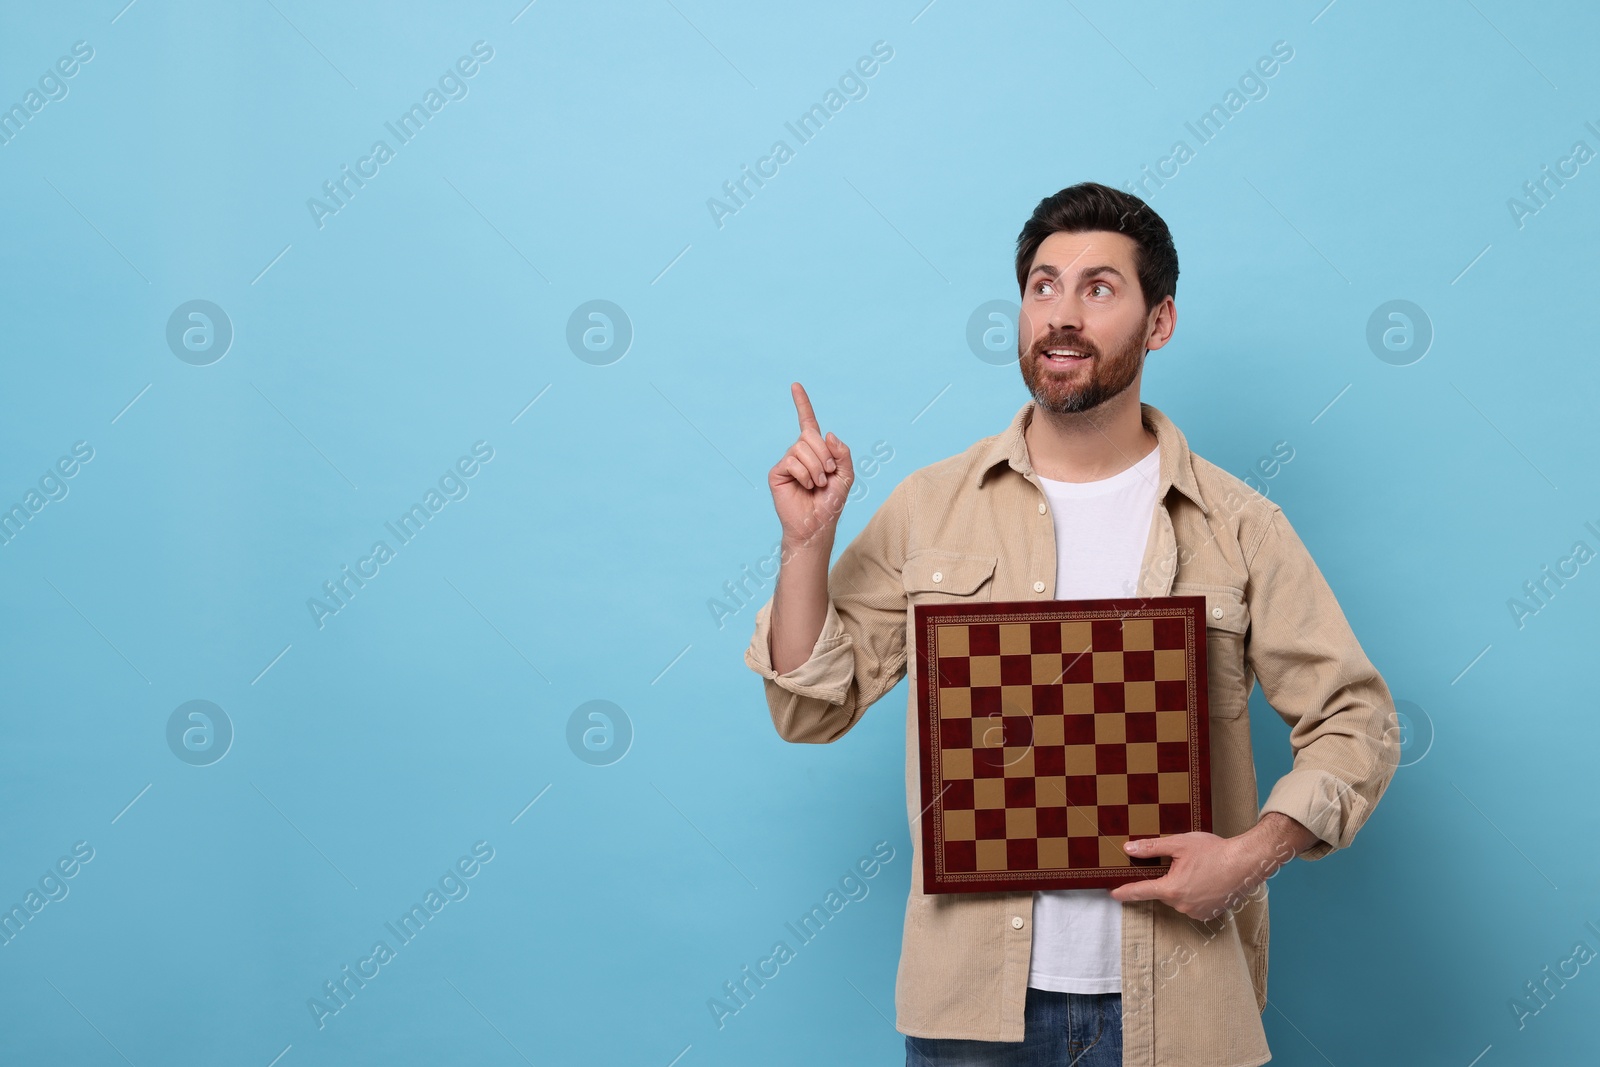 Photo of Smiling man holding chessboard and pointing at something on light blue background. Space for text